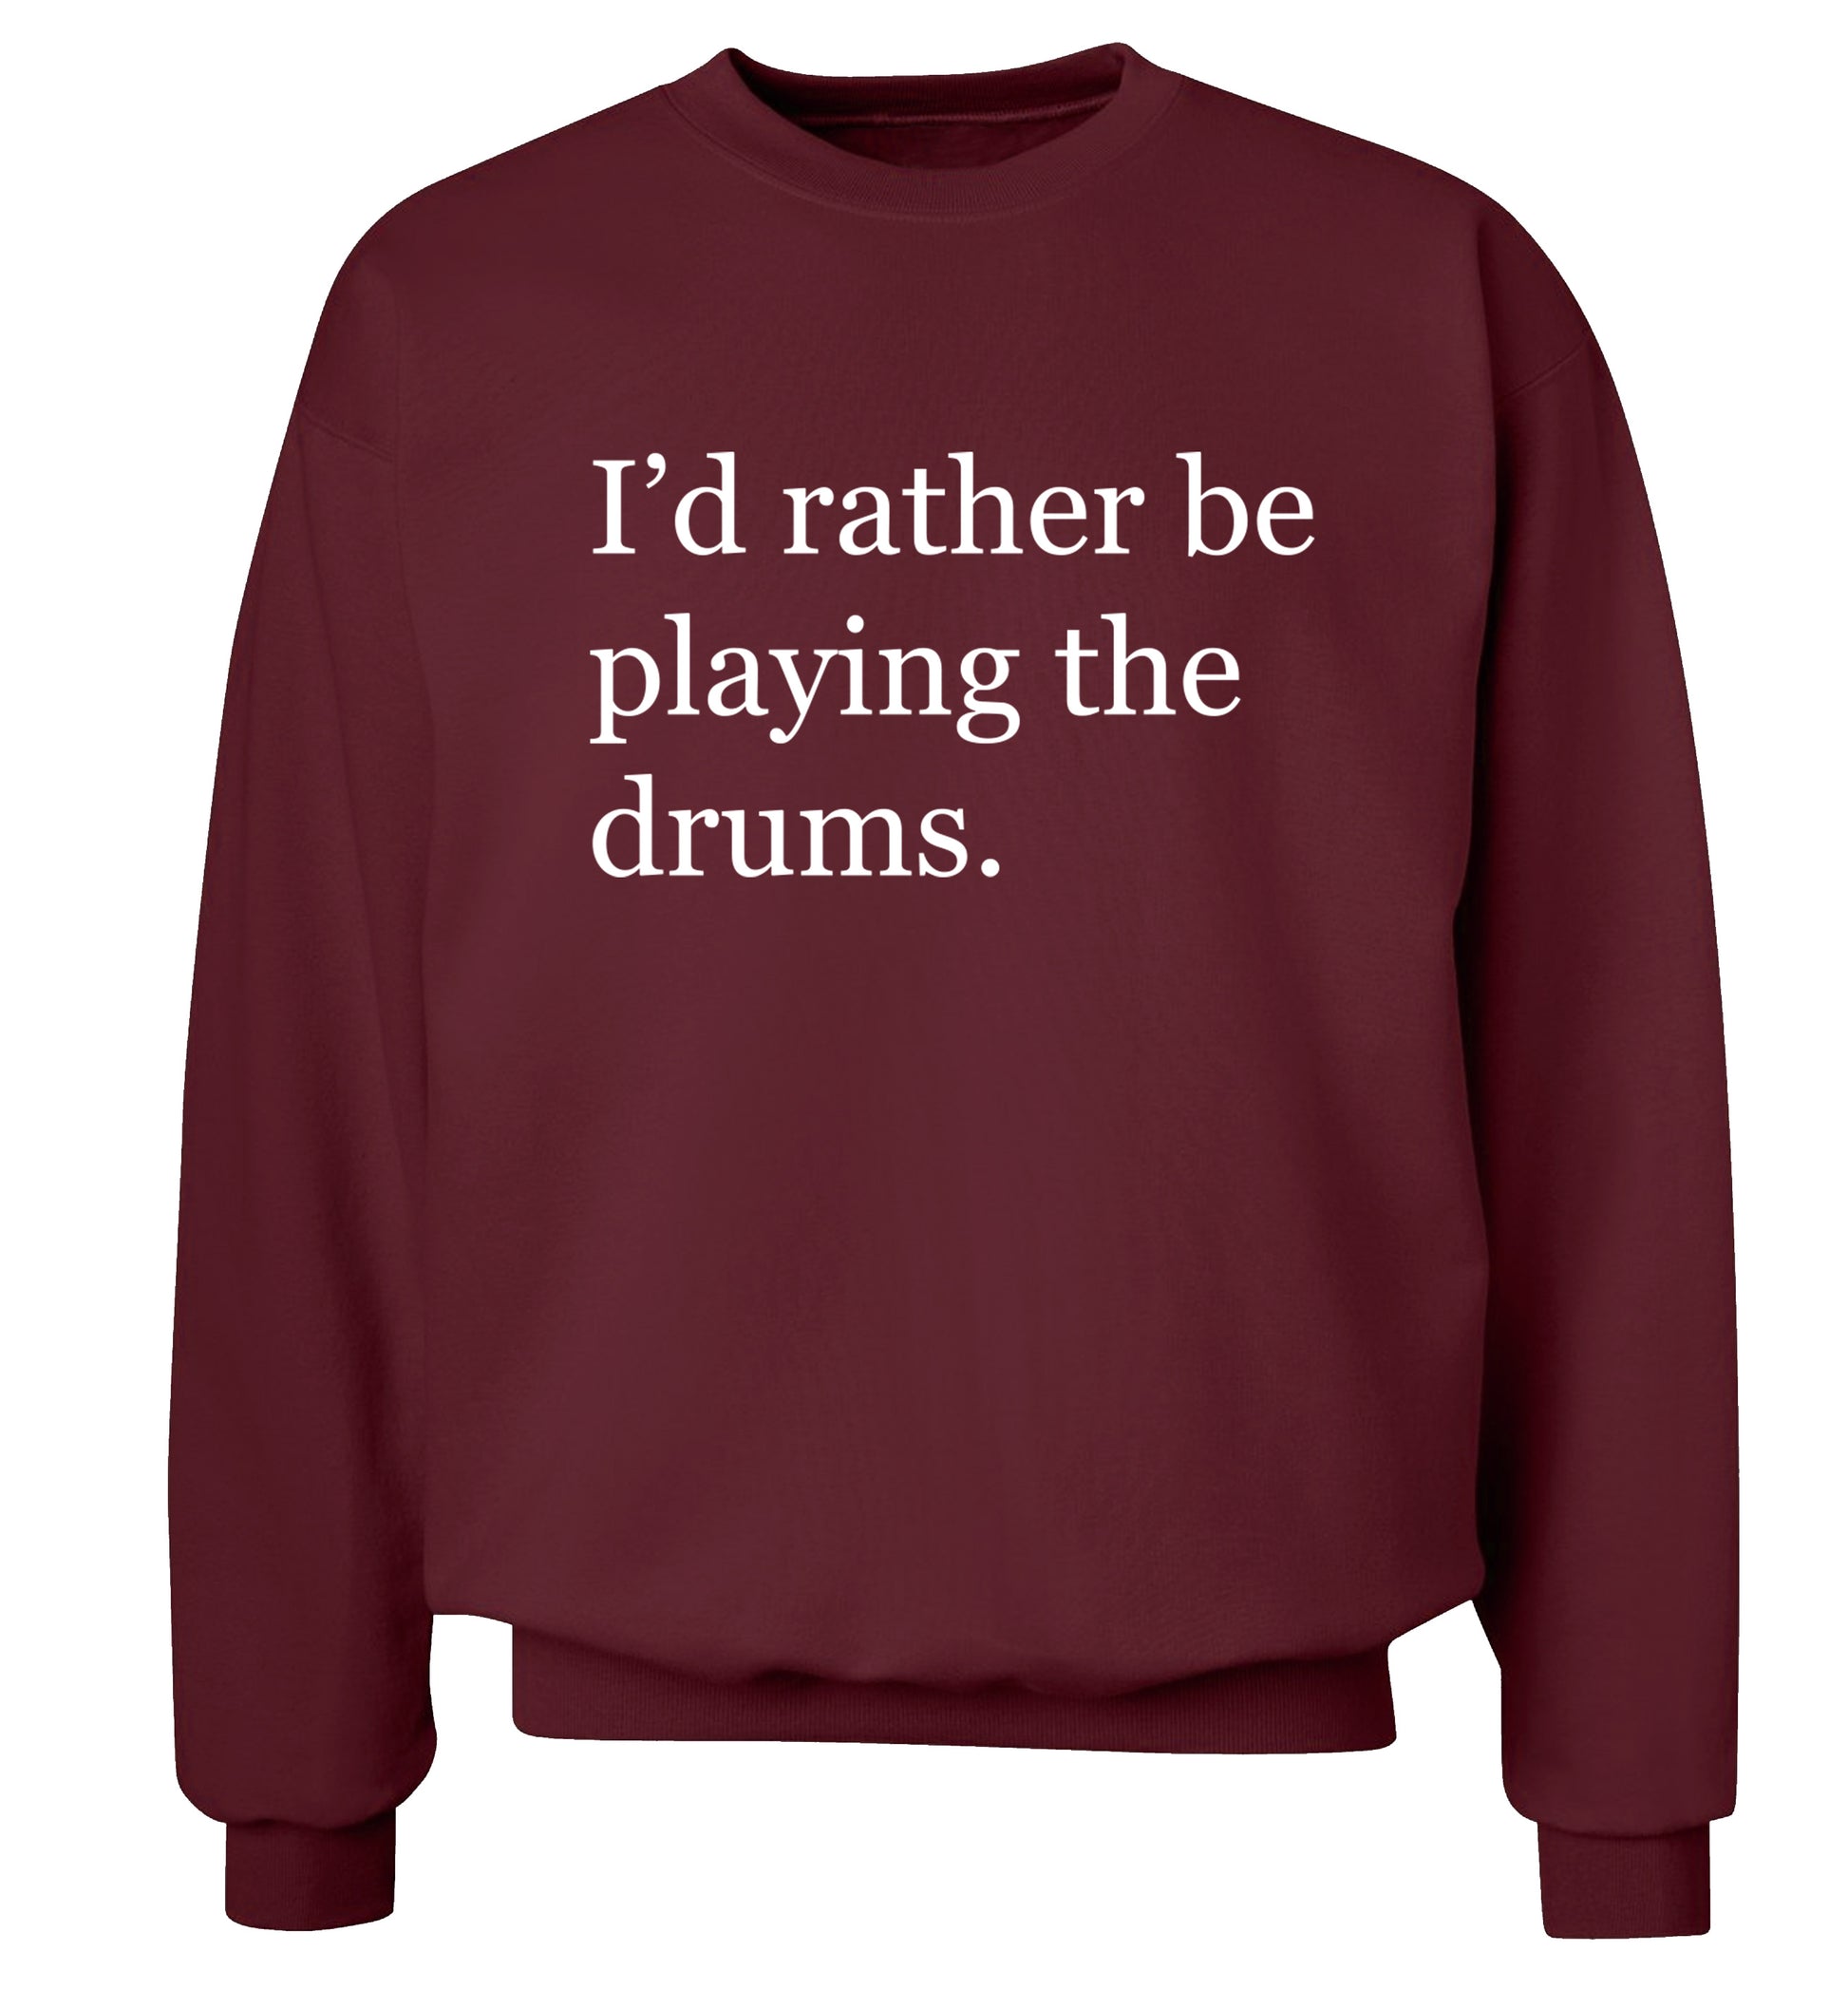 I'd rather be playing the drums Adult's unisexmaroon Sweater 2XL